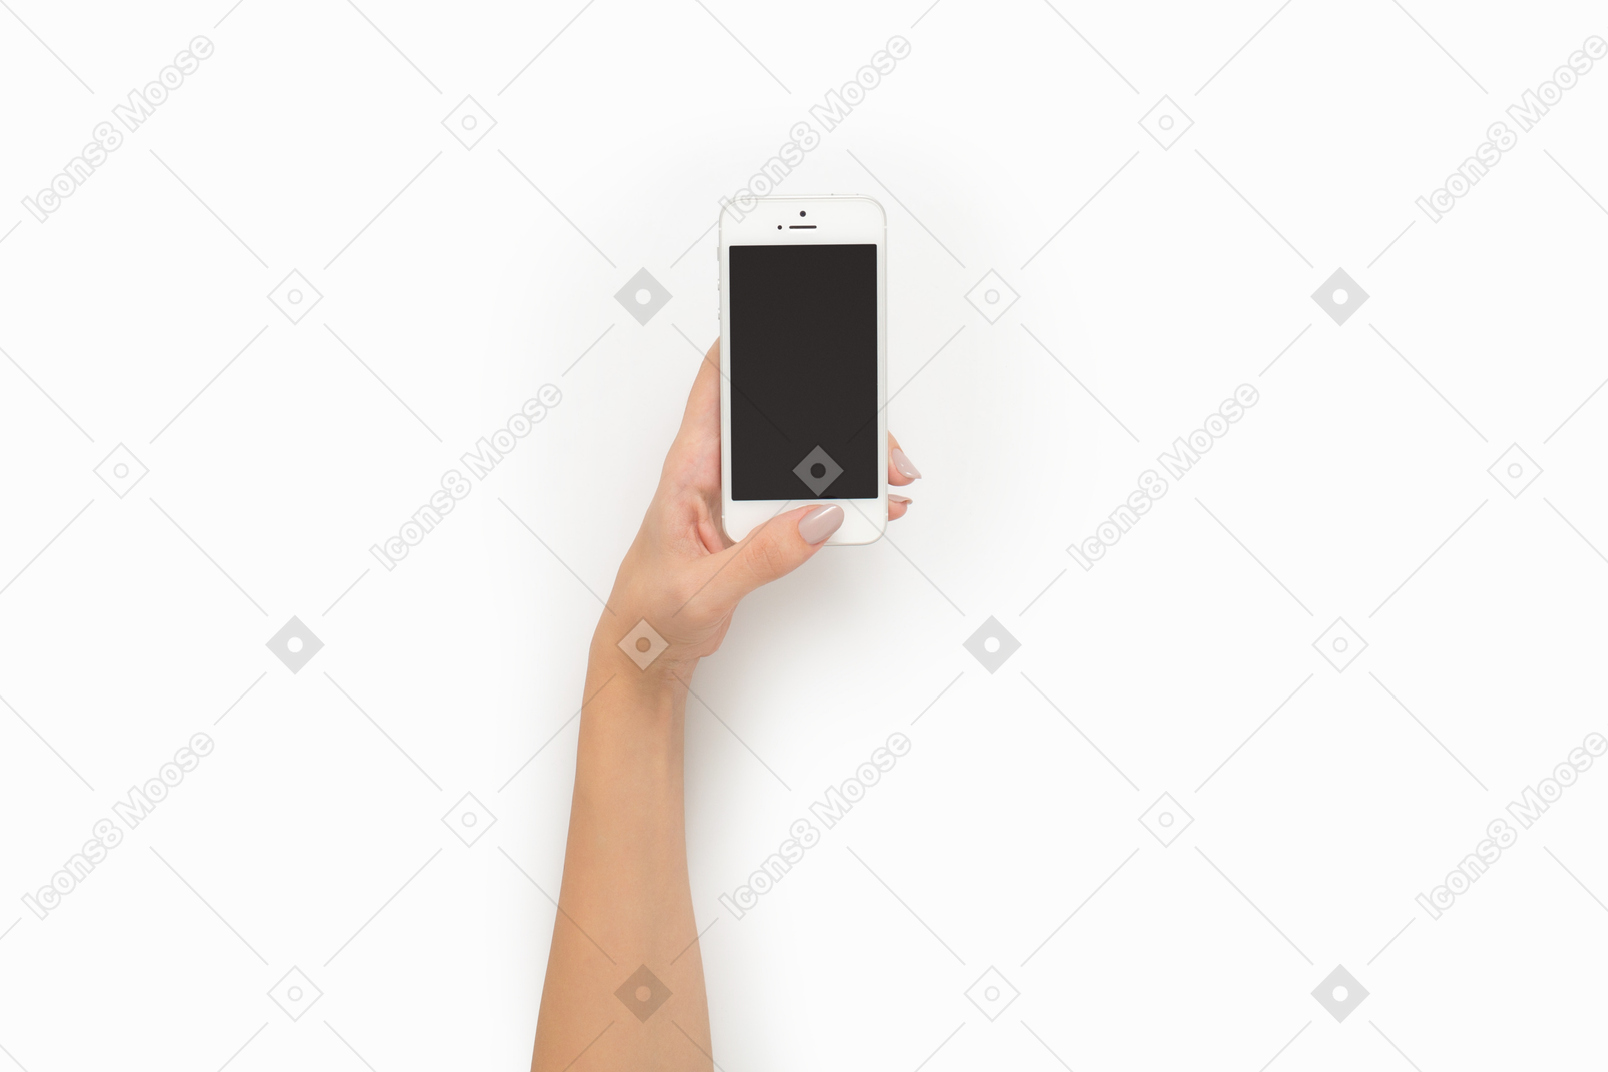 Female hand holding a smartphone